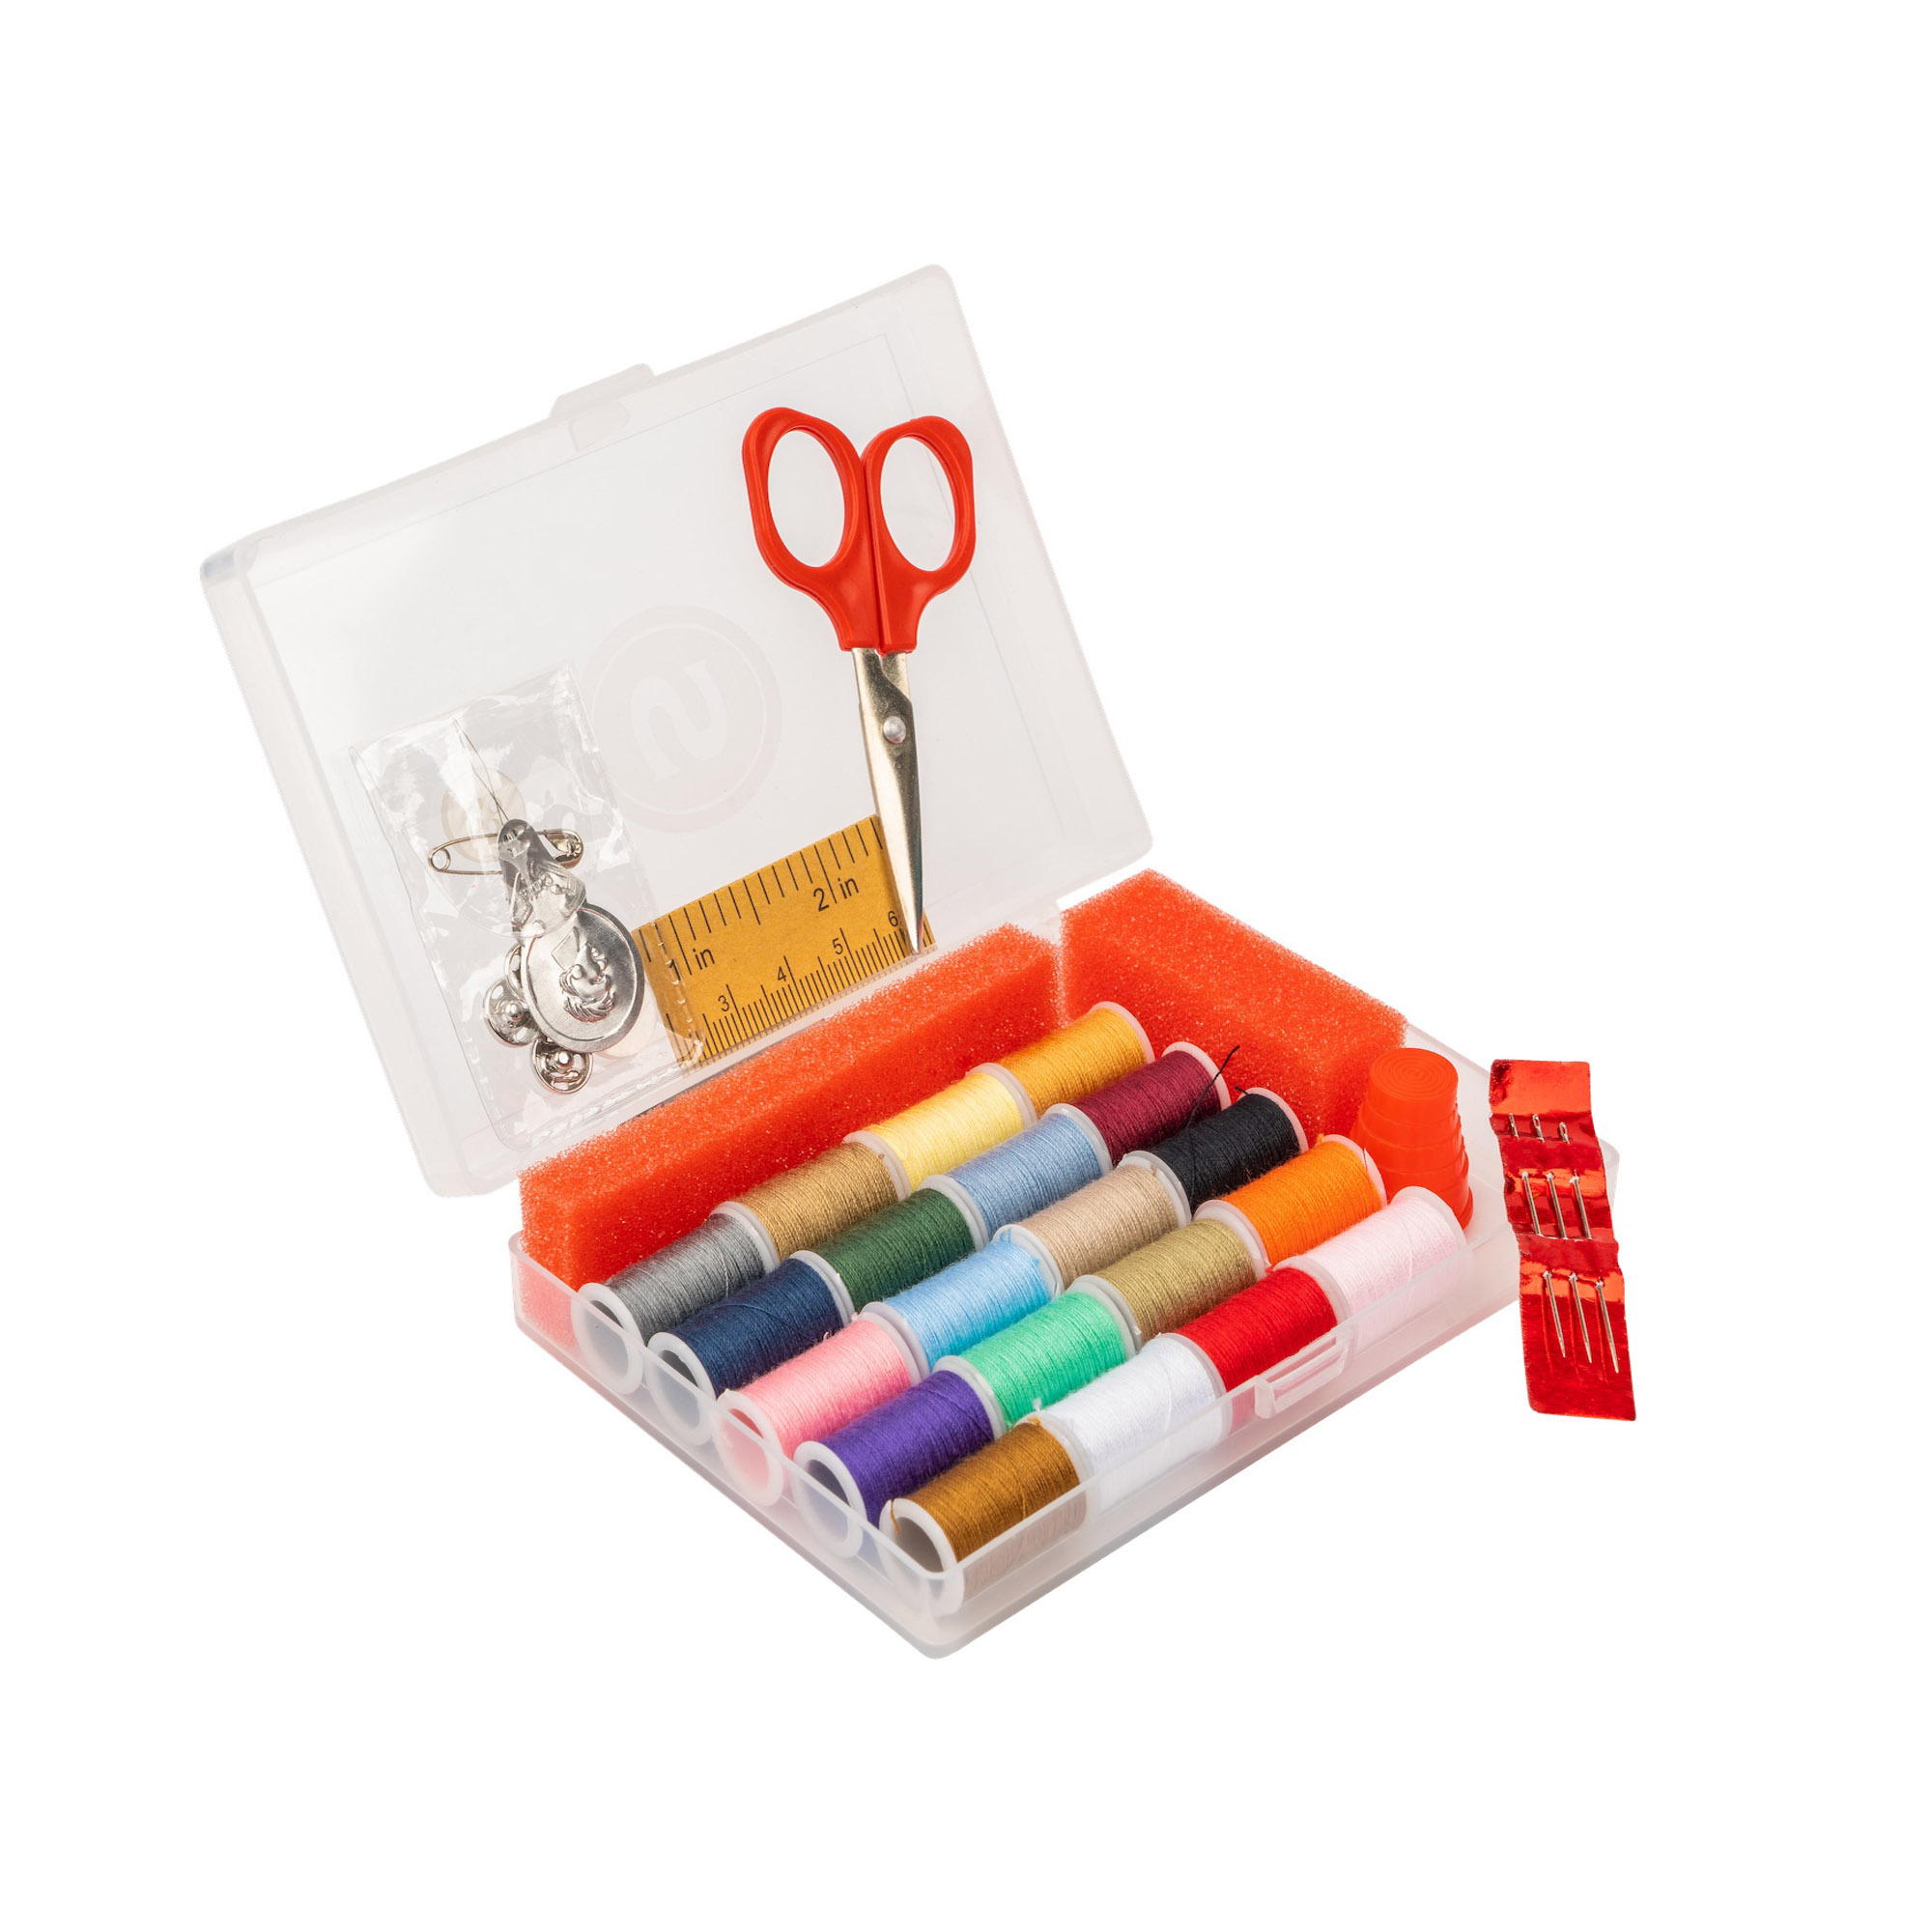 Deluxe Sewing Kit- - image 4 of 6